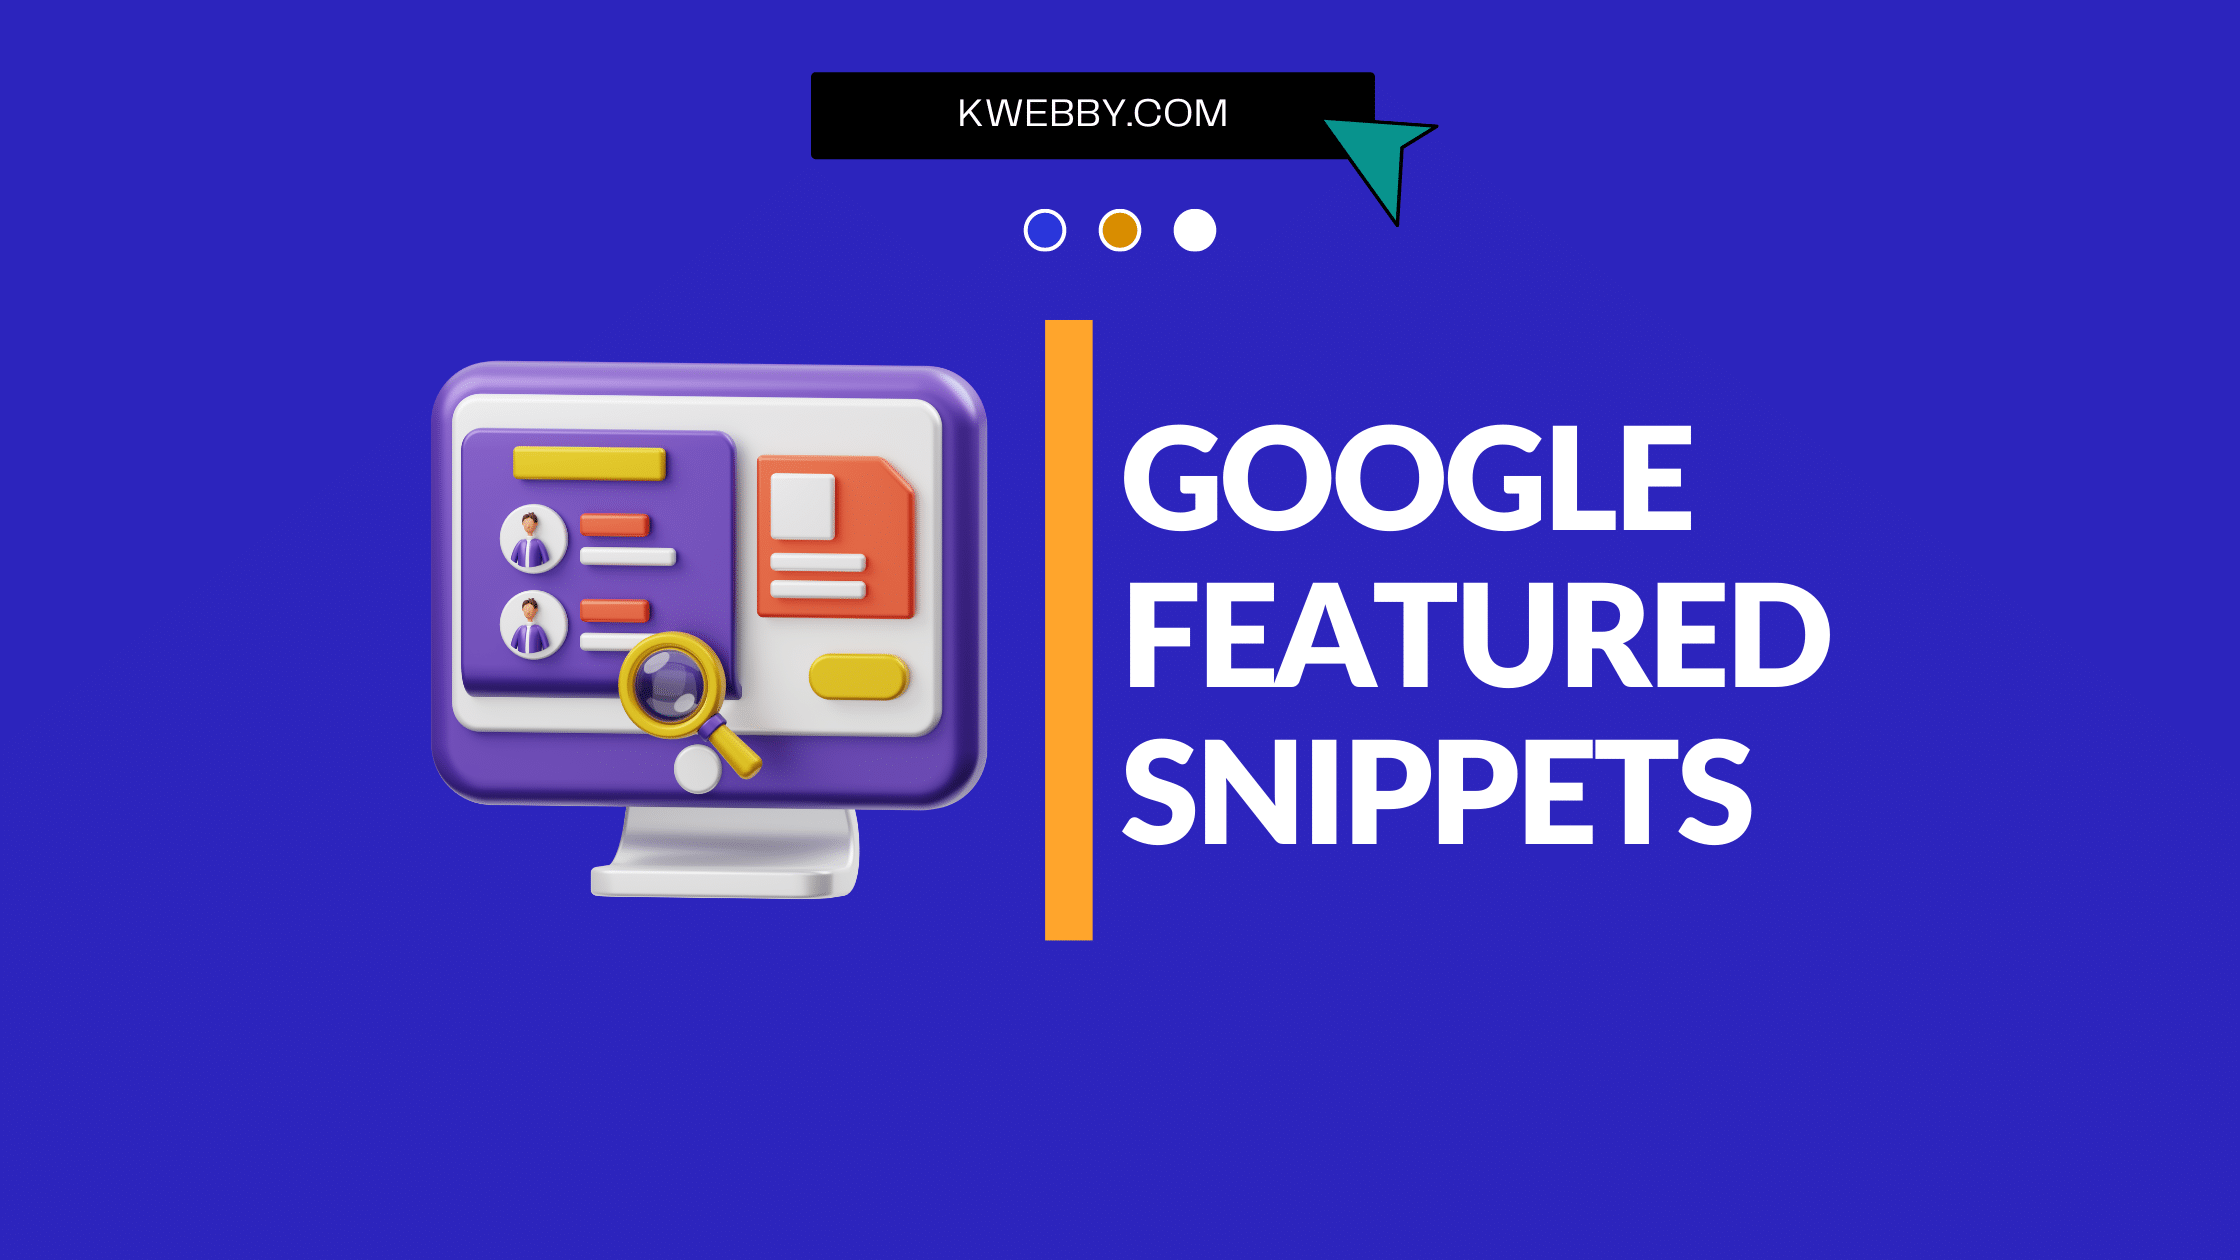 Google Featured Snippets: 10 EASY Tips to Get Your Content On Snippets